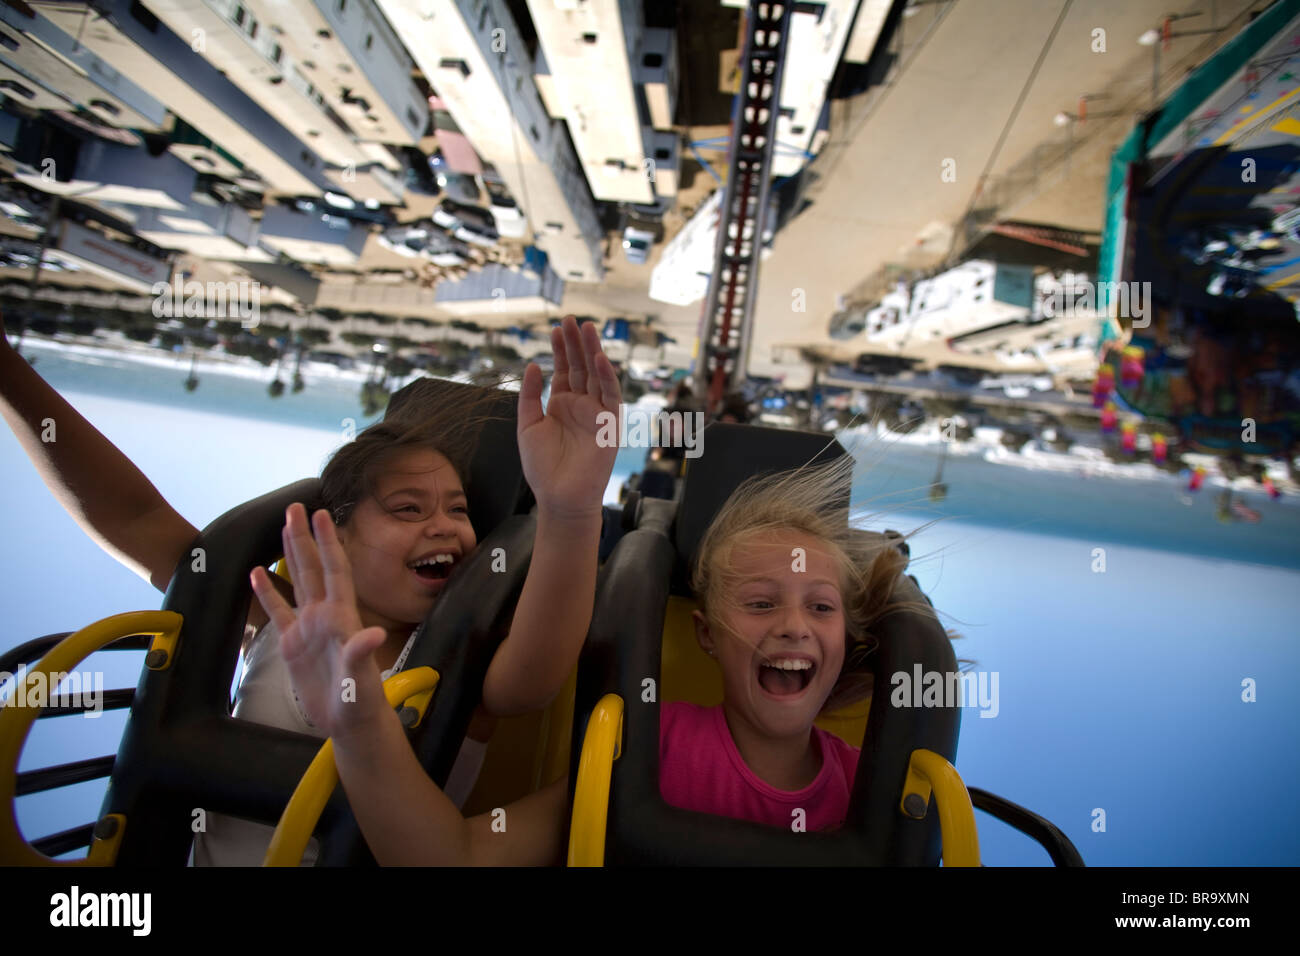 Two young girls scream upside down on a carnival ride at the Ventura County Fair. Stock Photo